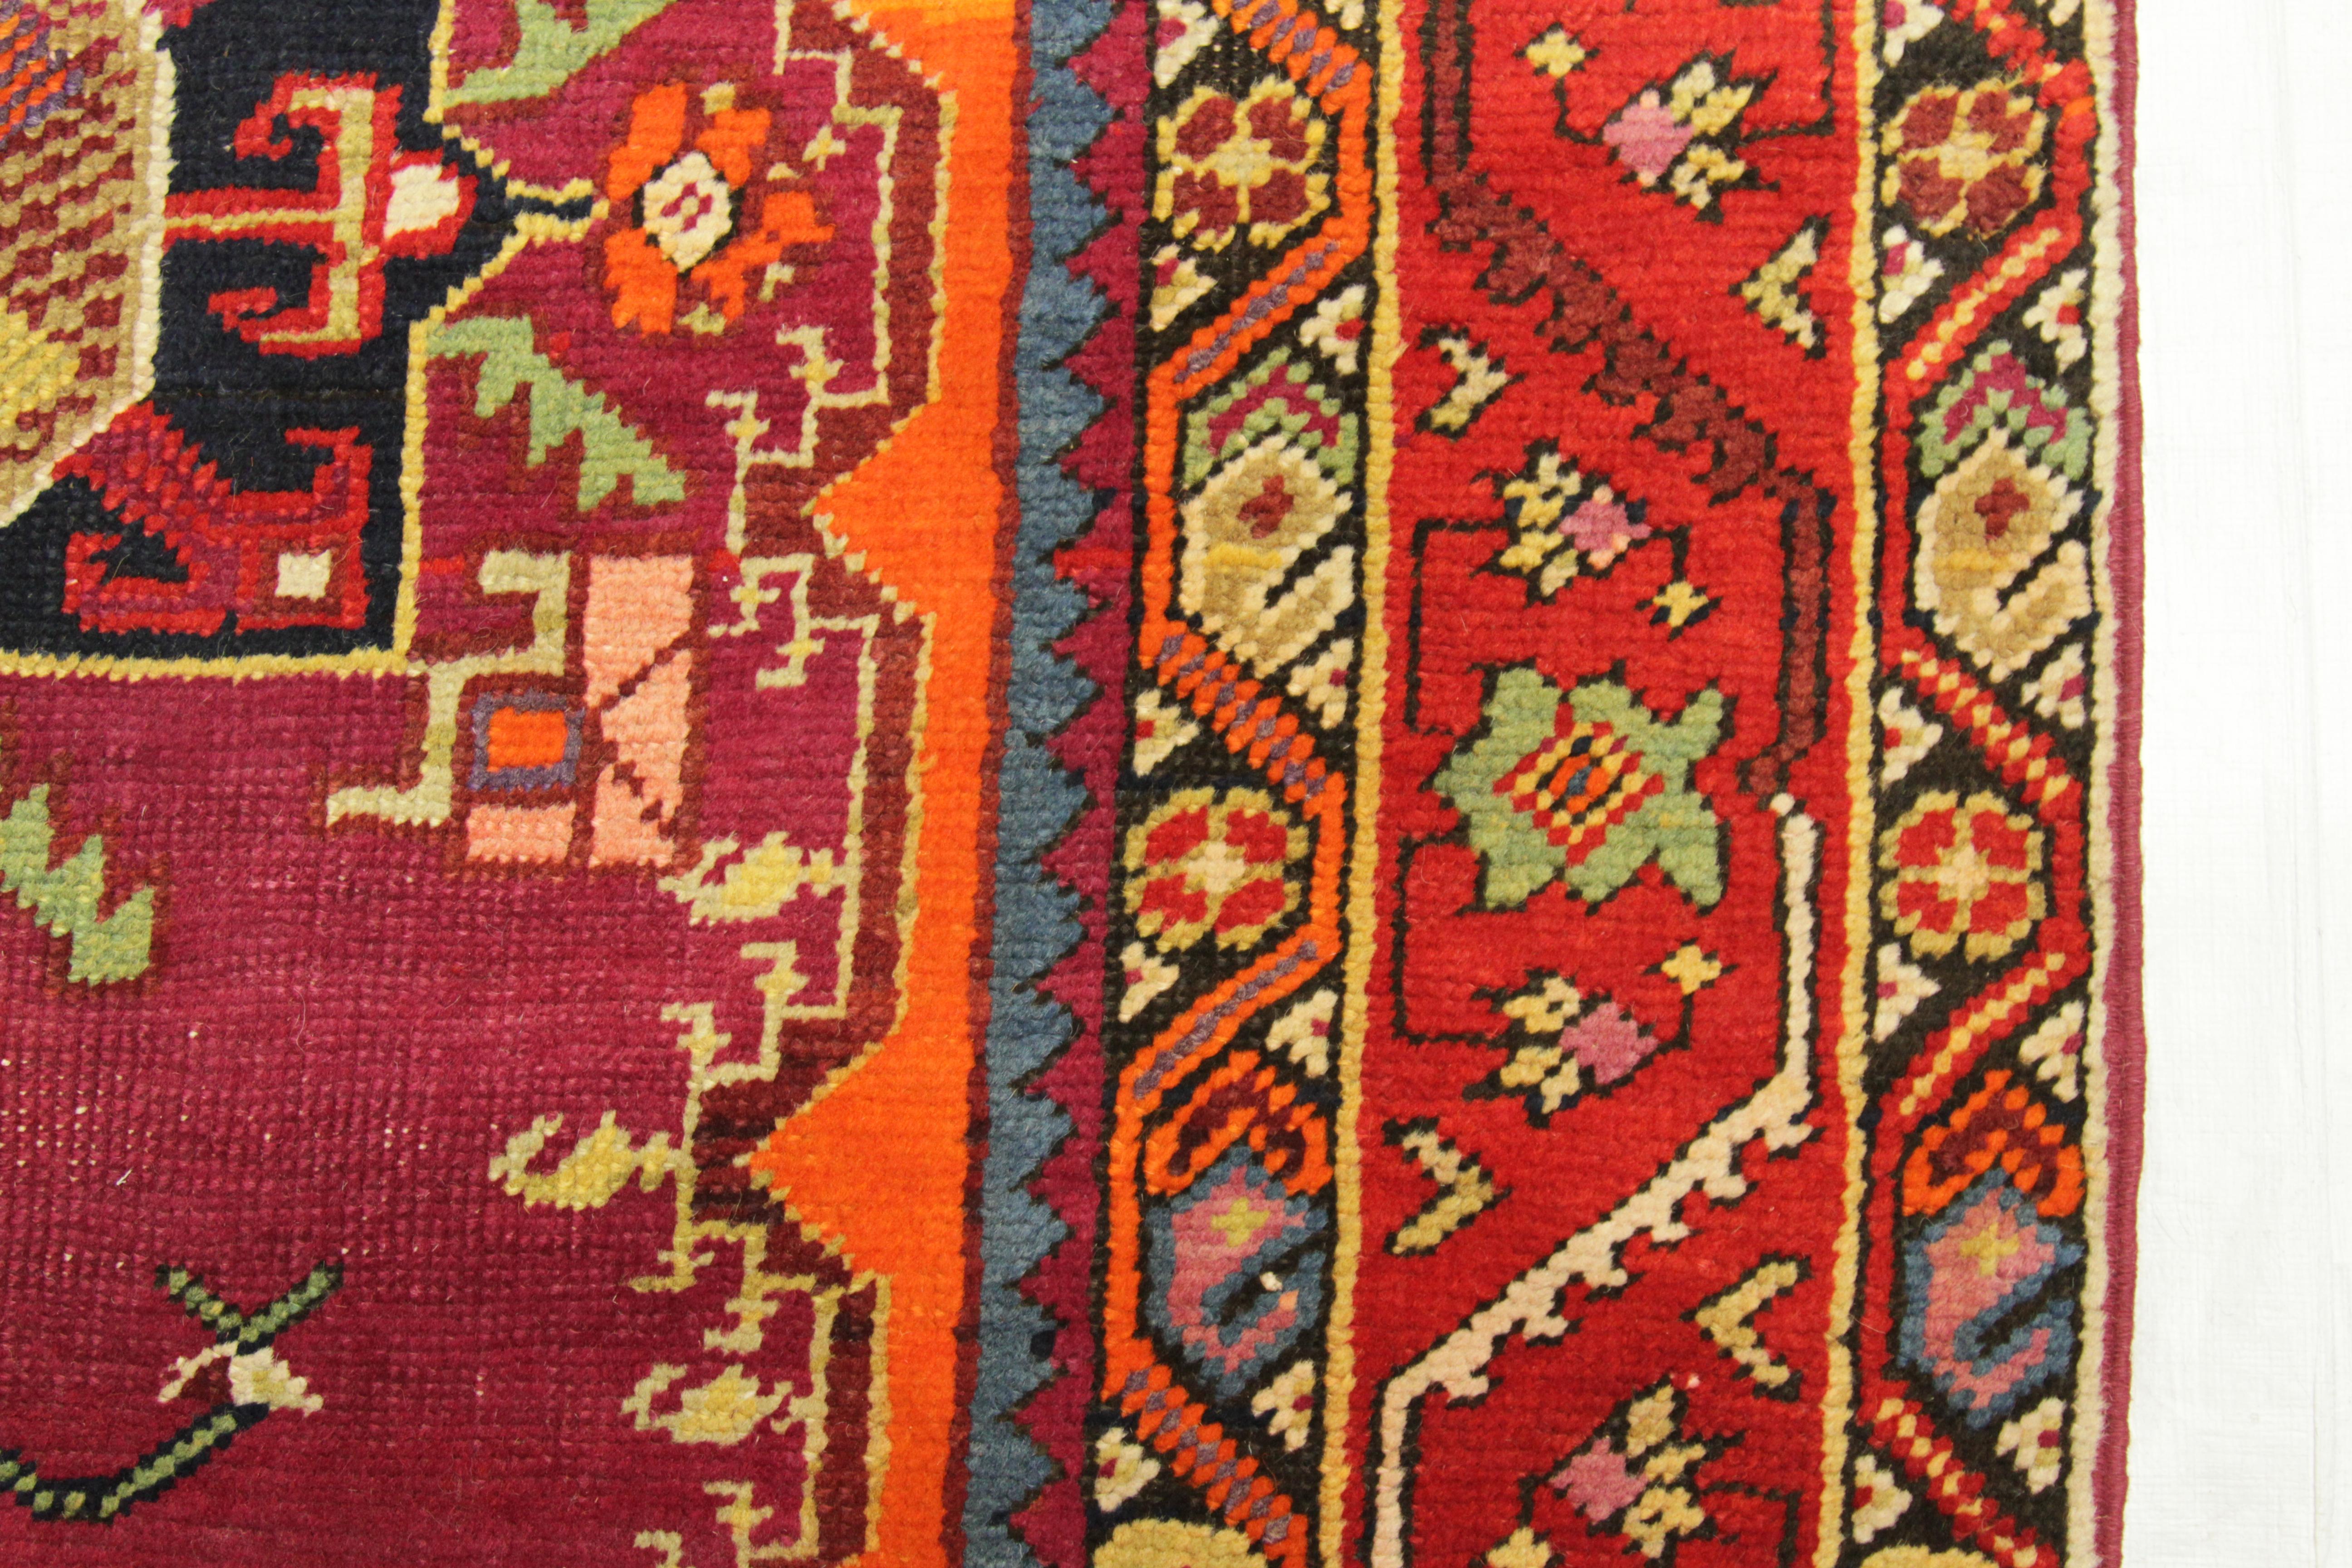 Twin Antique Persian Rug Karabagh Design with Gemstone Patterns, circa 1950s For Sale 3